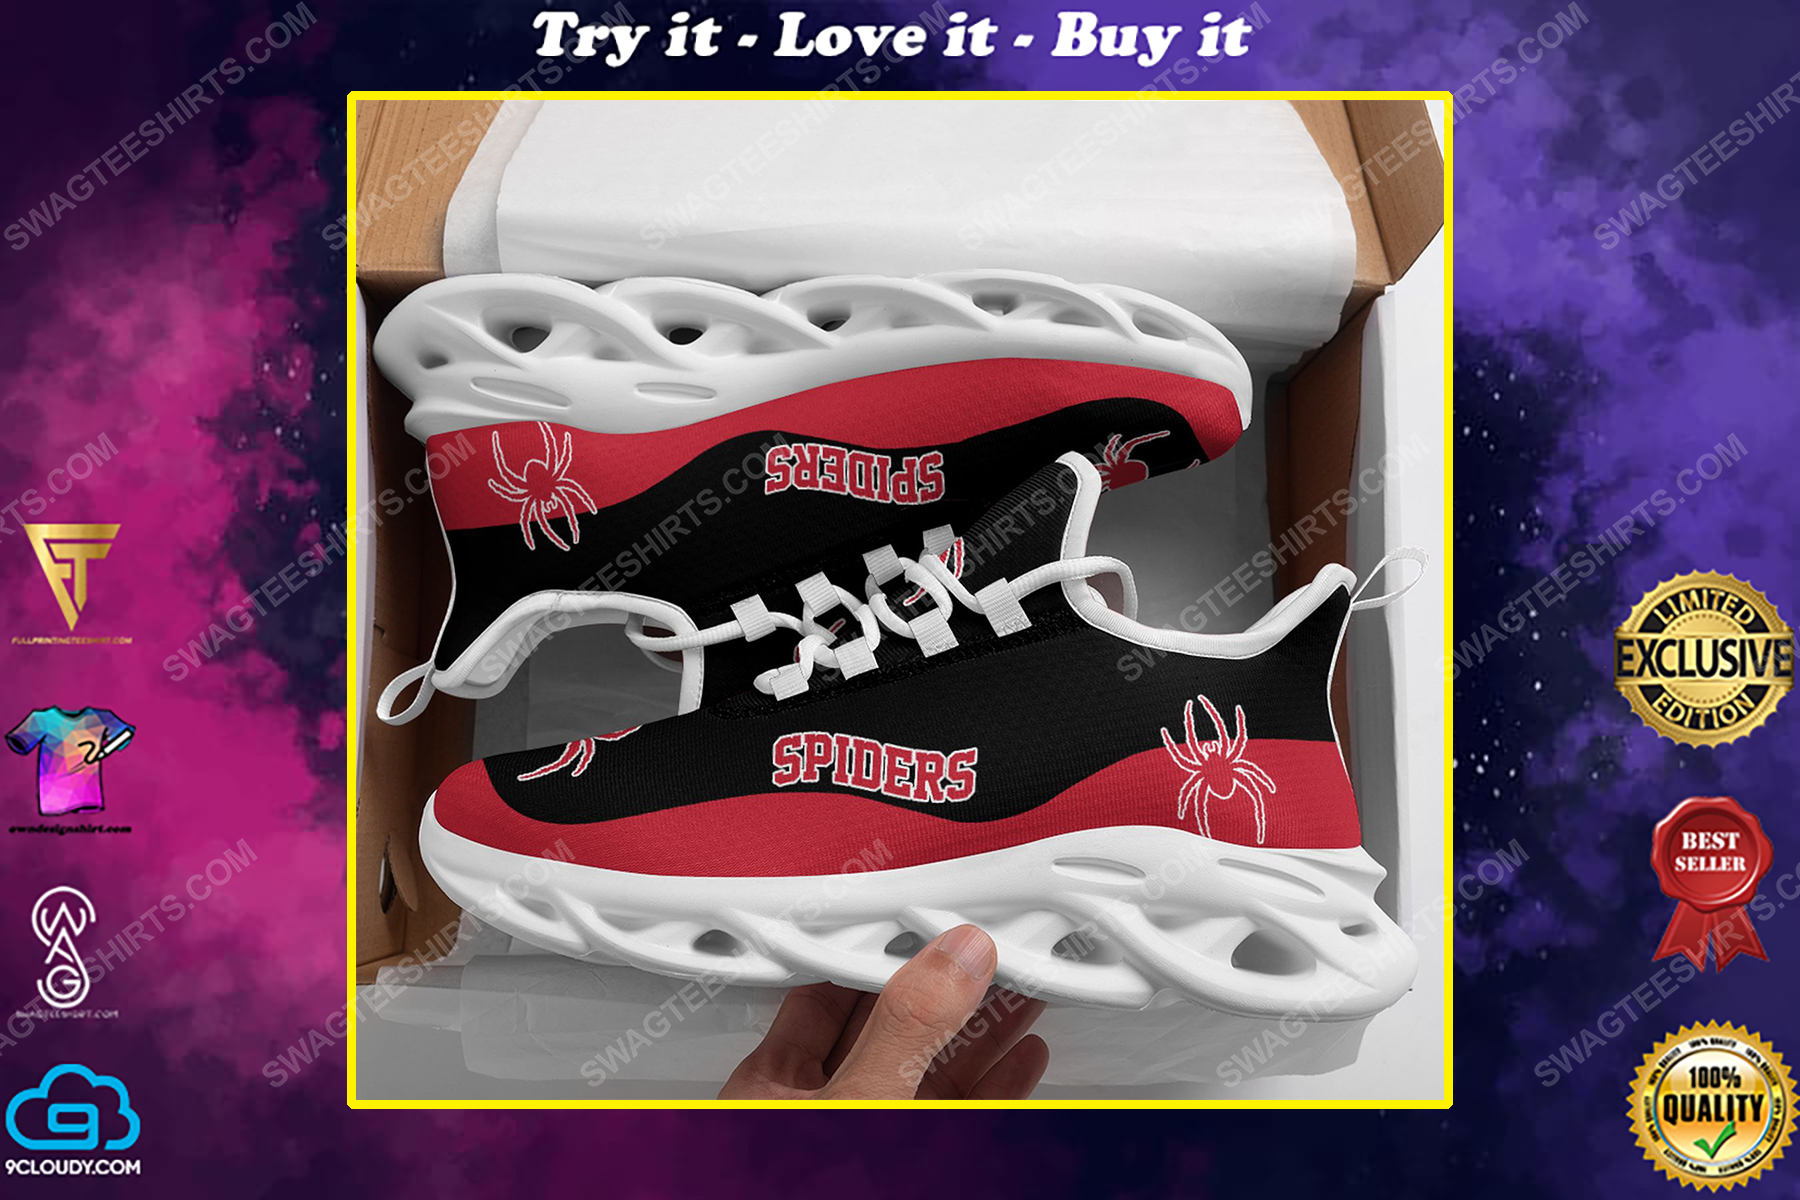 Richmond spiders football team max soul shoes